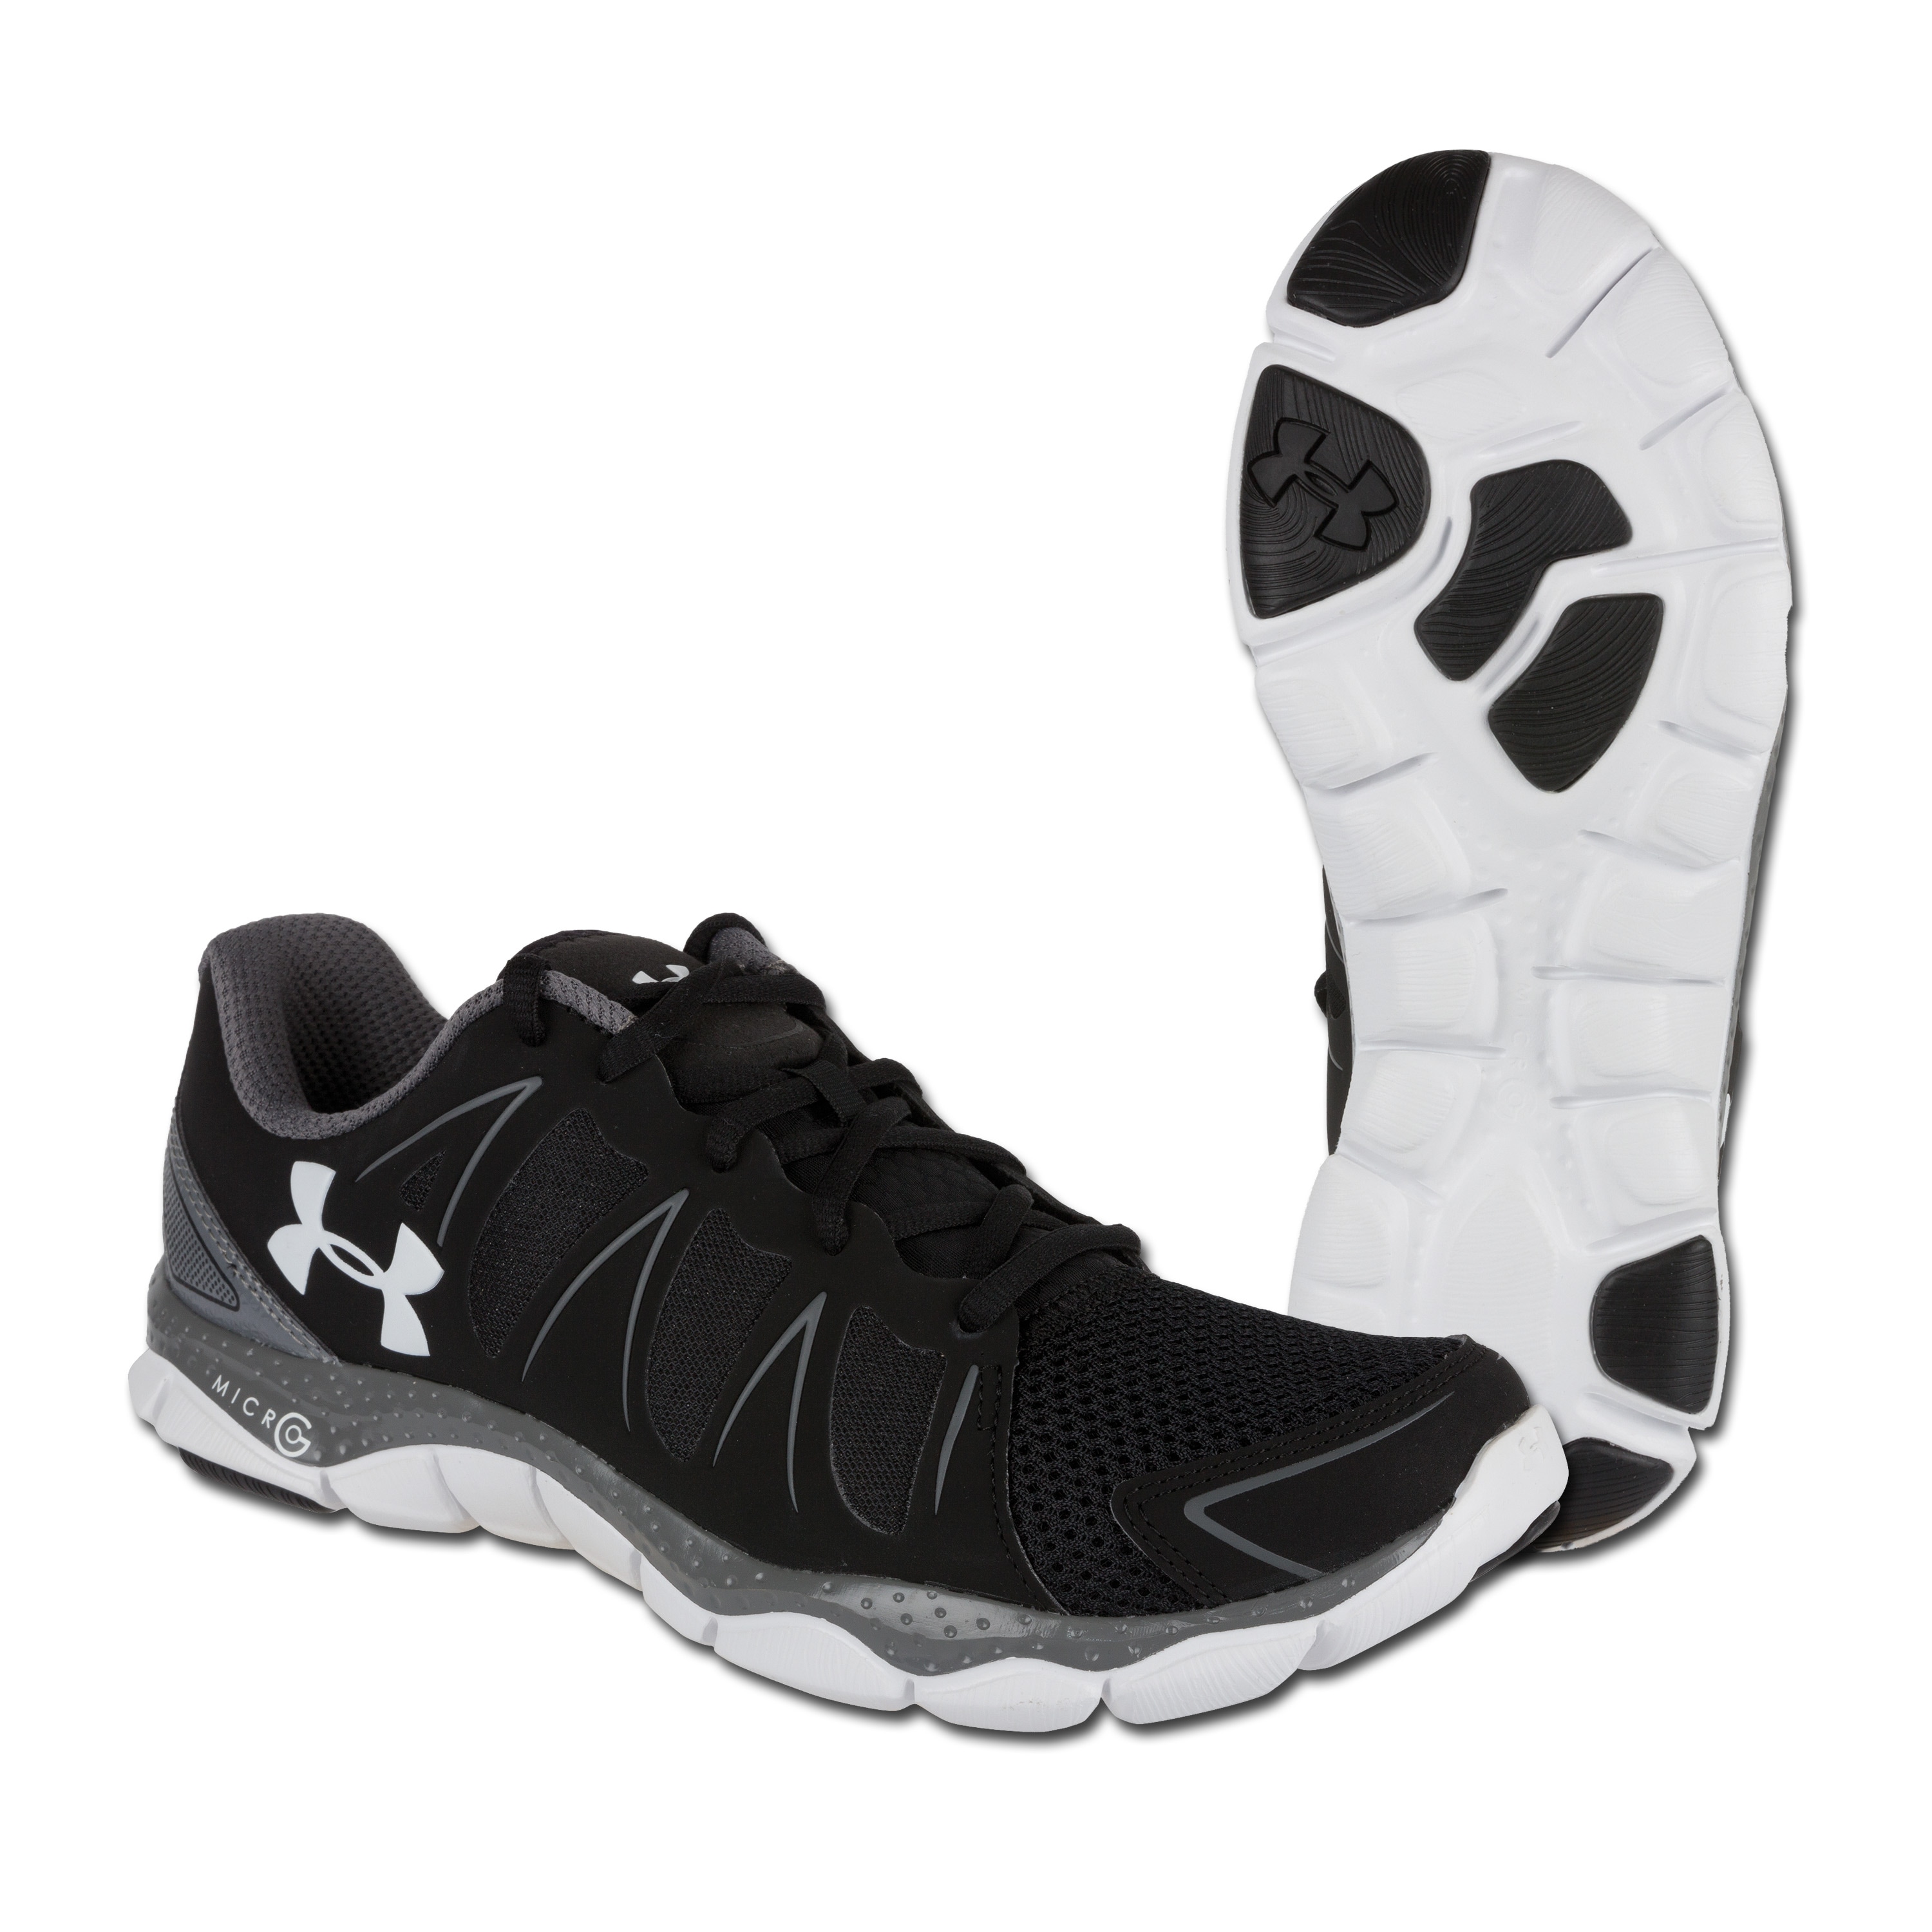 Under Armour Shoe Micro G Engage black | Under Armour Shoe Micro G Engage II black | Other Shoes Shoes | Footwear | Clothing